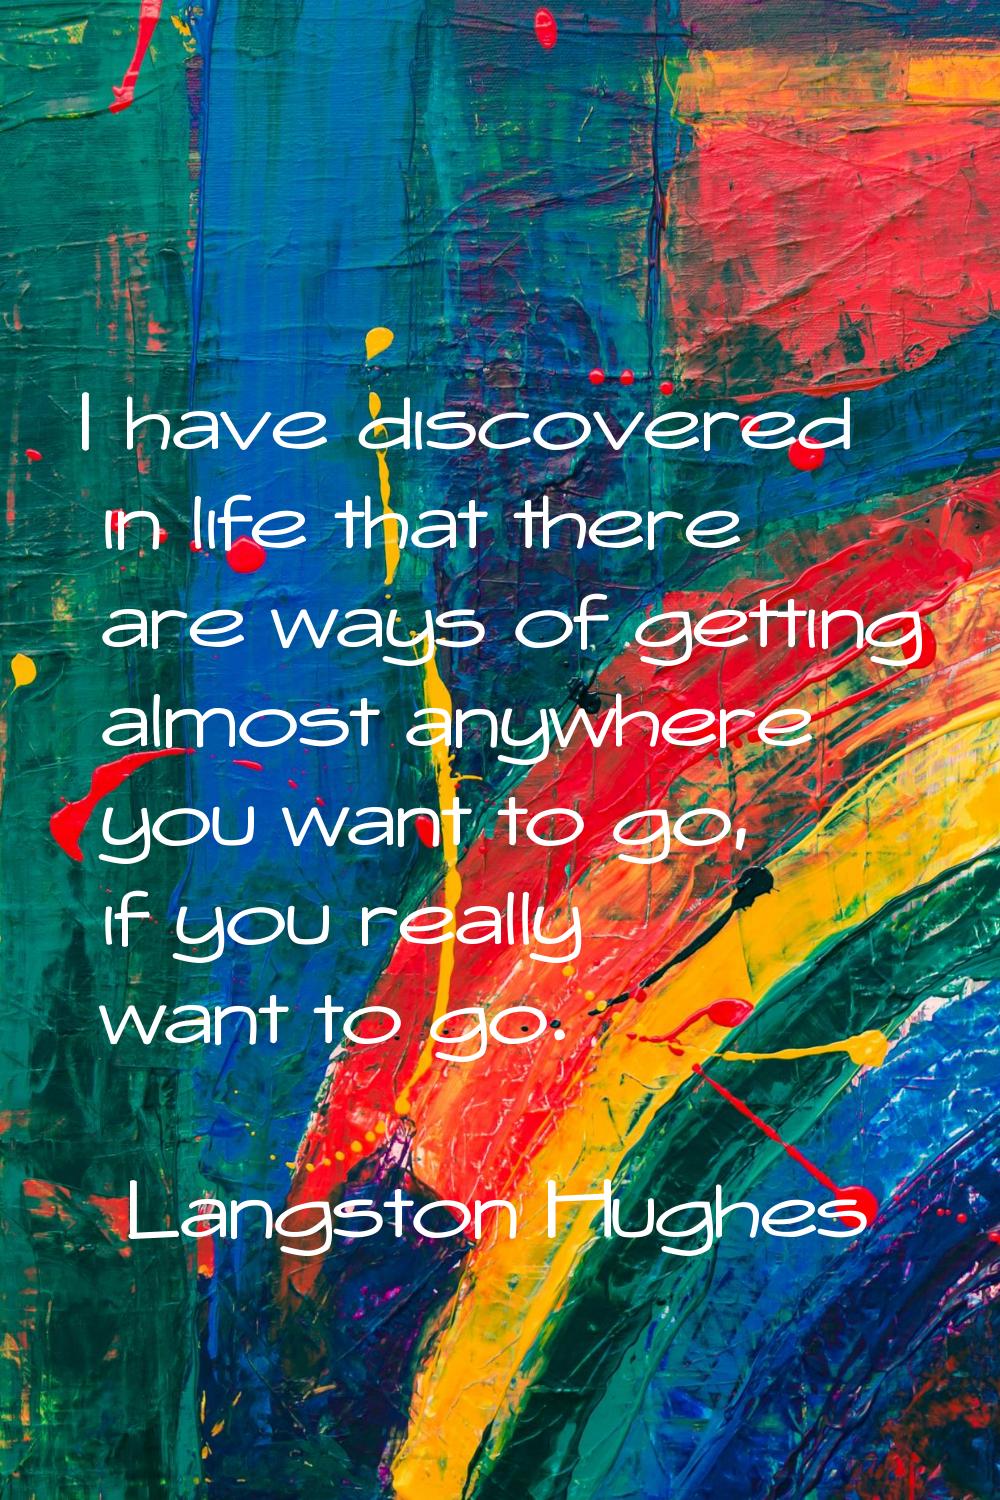 I have discovered in life that there are ways of getting almost anywhere you want to go, if you rea